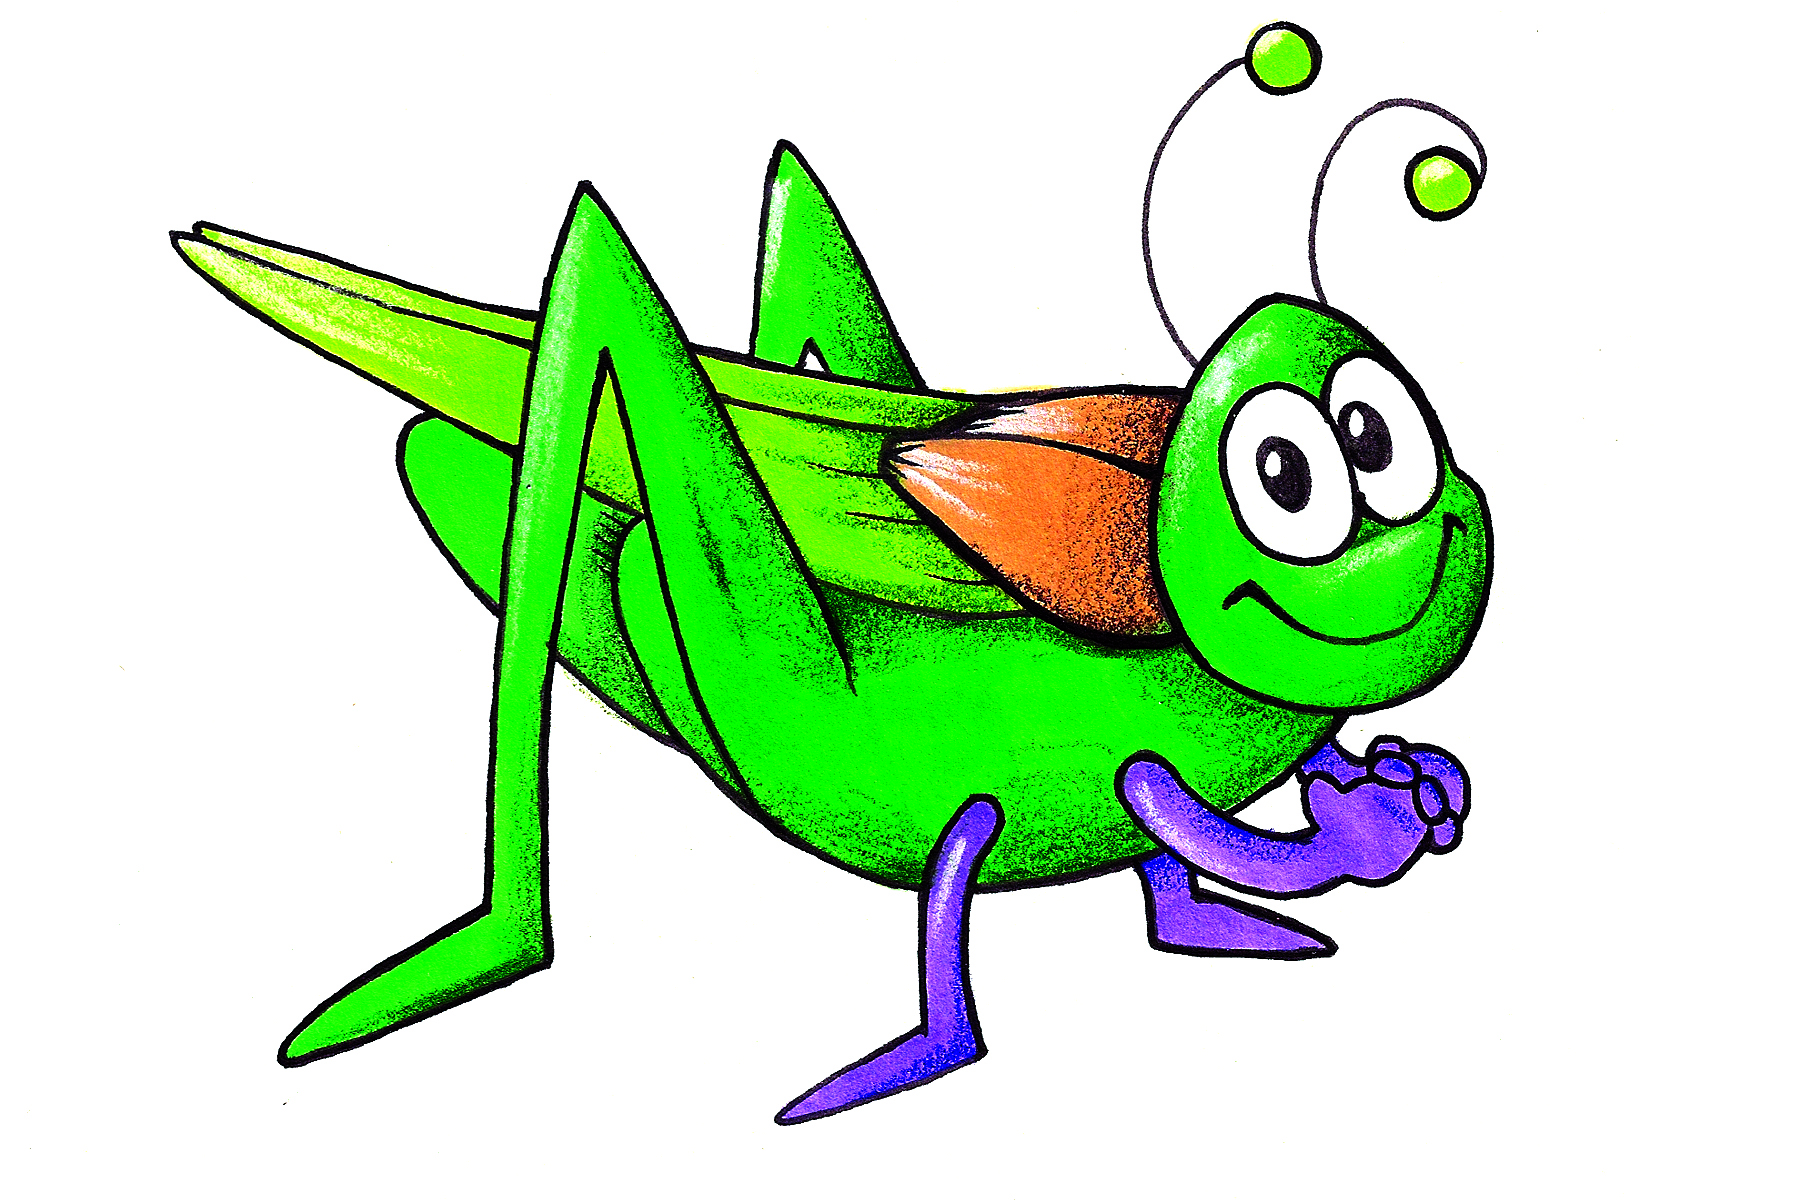 Cricket Insect Clipart Clipart Best